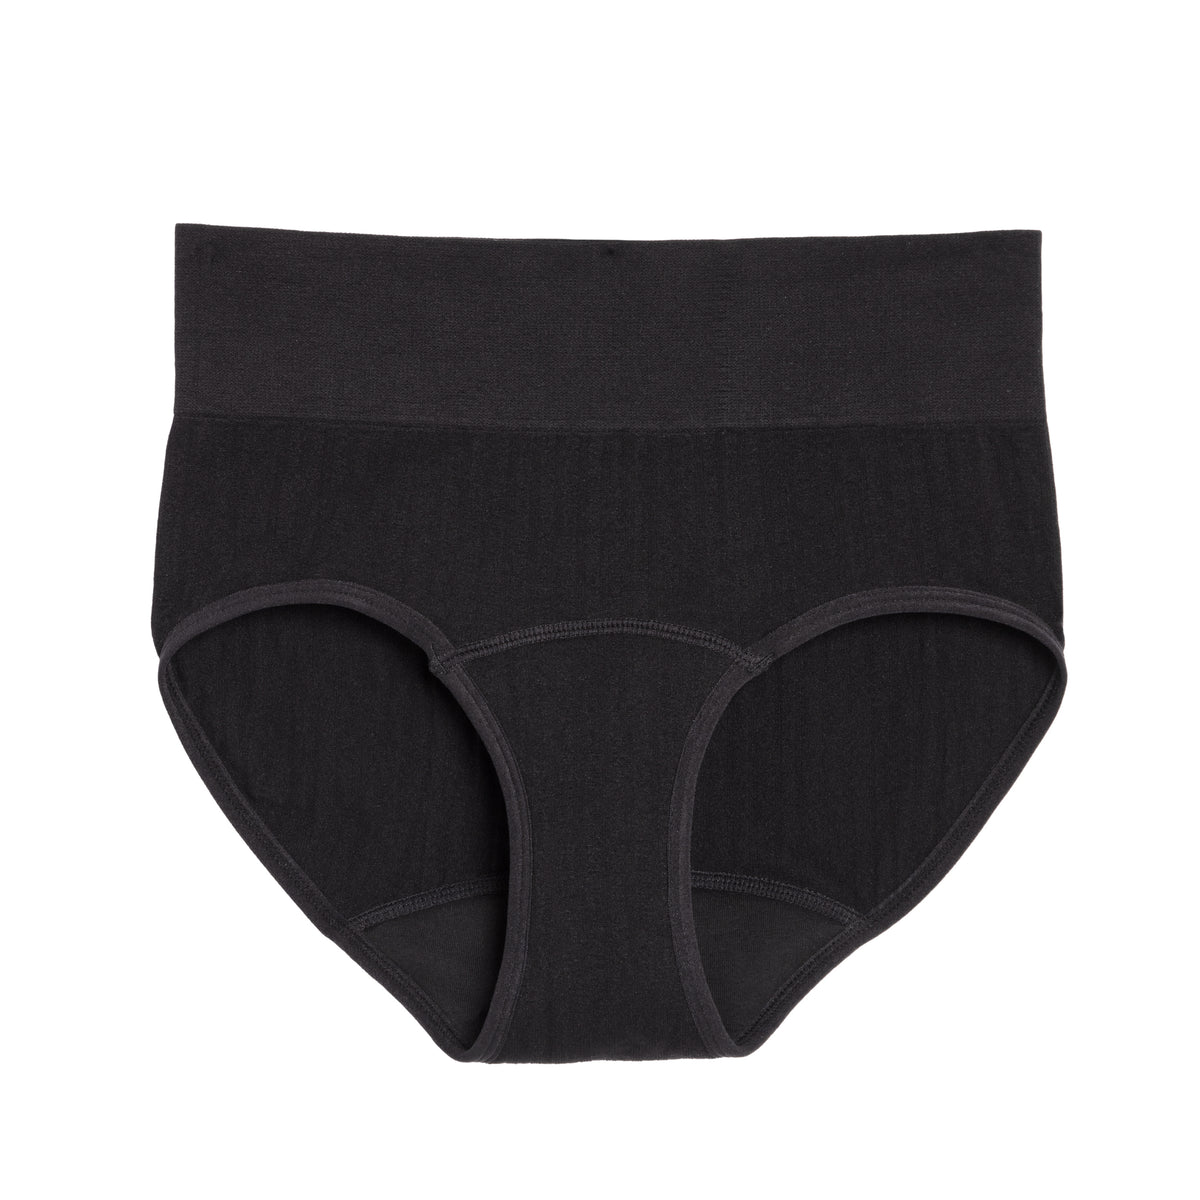 The Period Company. The Thong Period. in Sporty Stretch for Light Flows.  Size Large (Women's) 